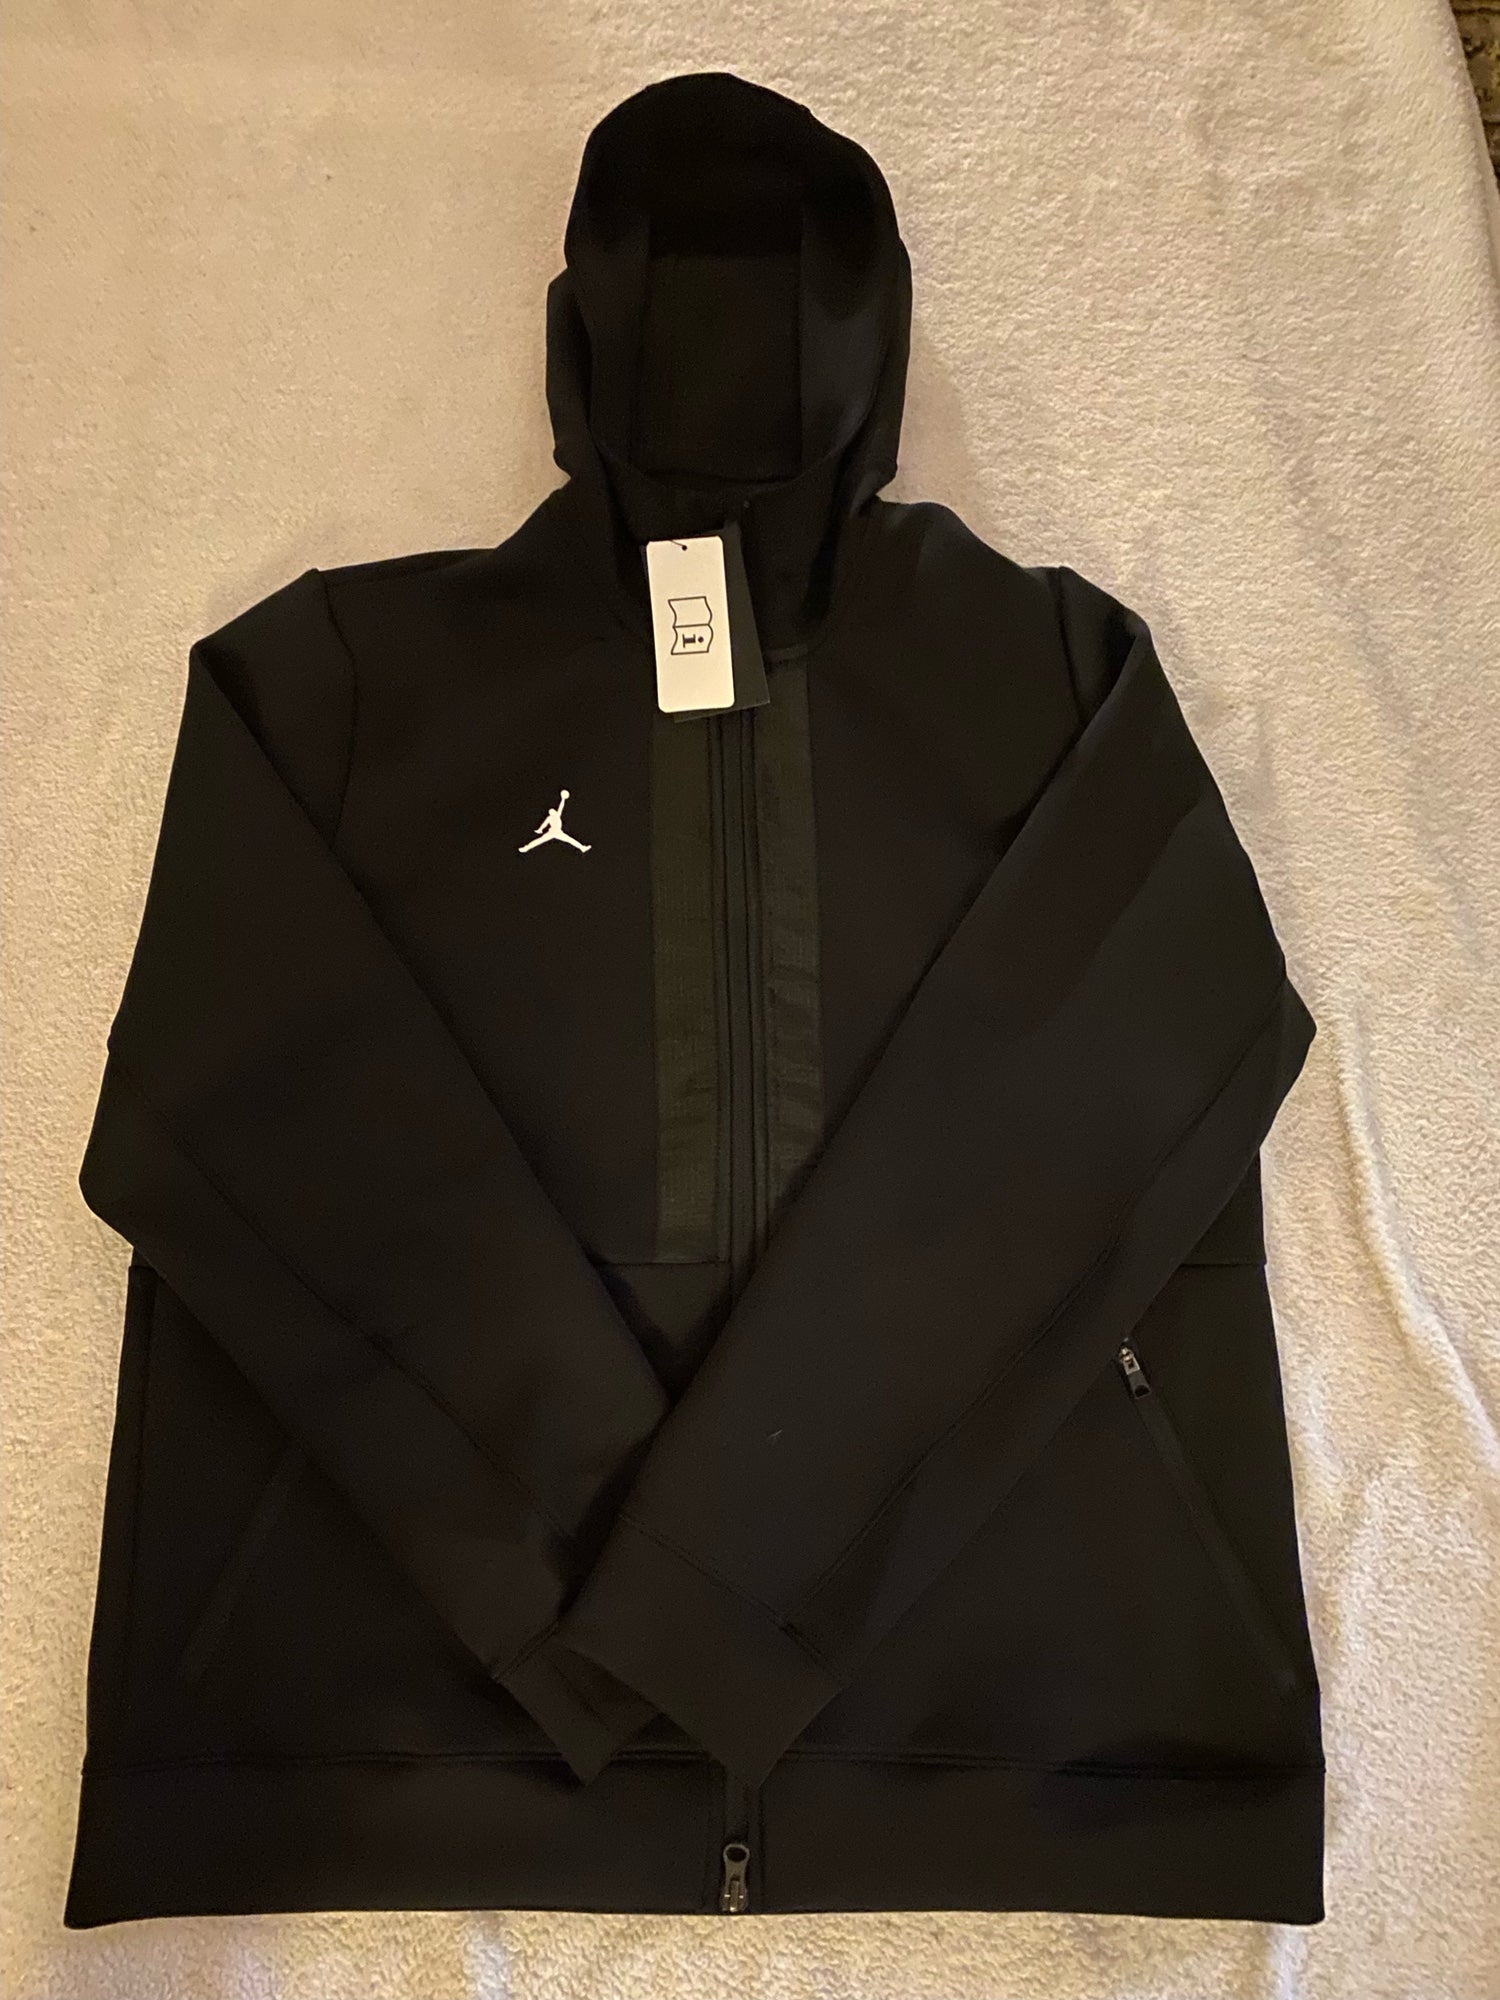 Jordan Apparel for sale | New and Used on SidelineSwap